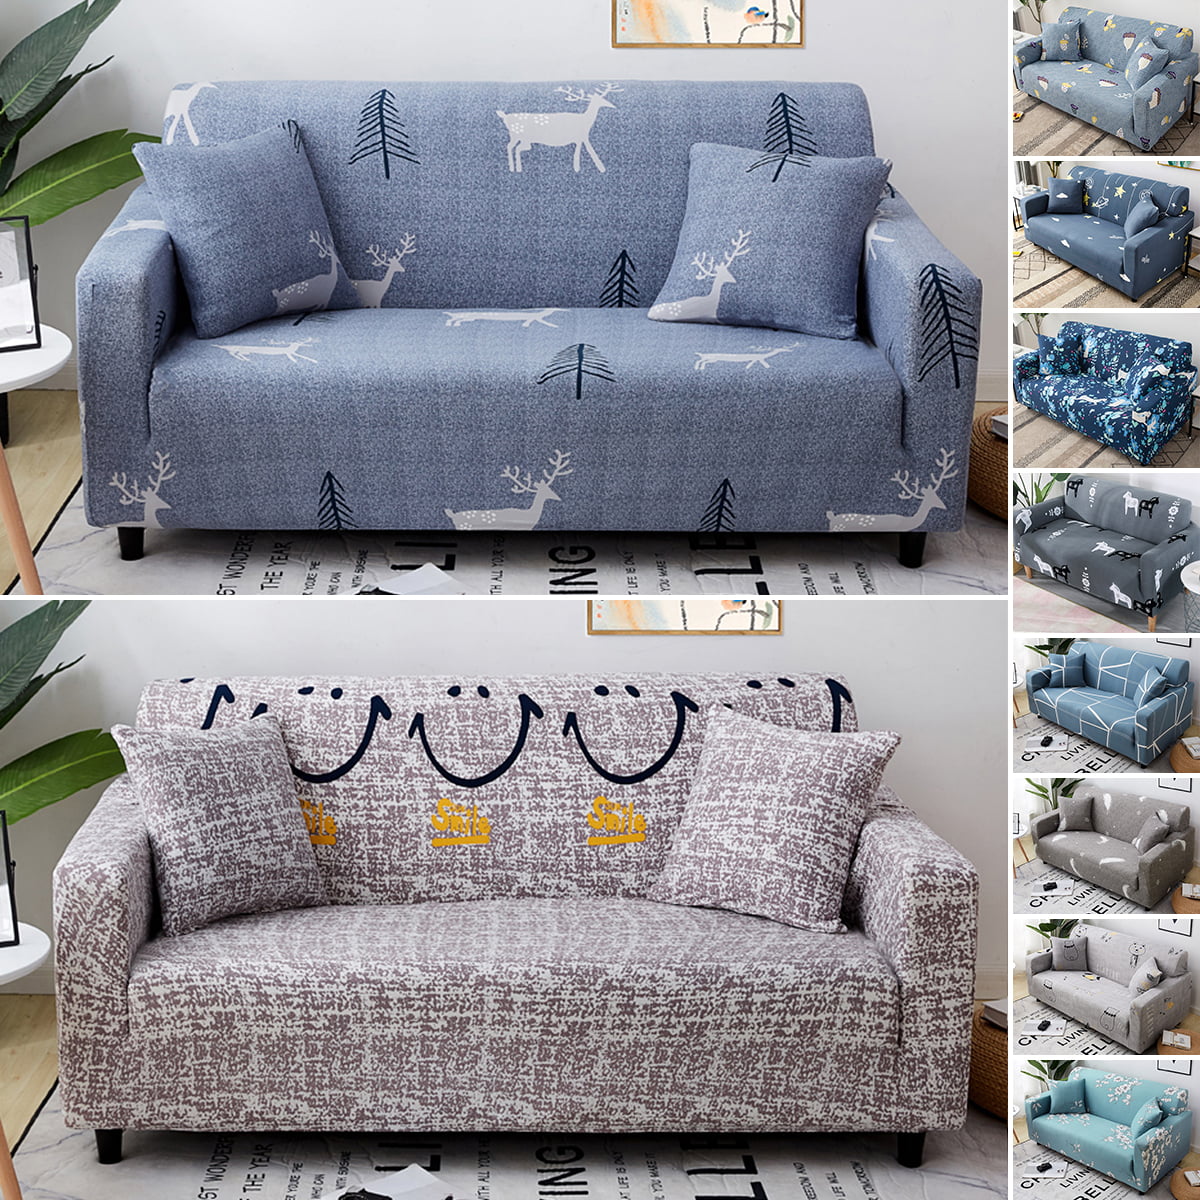 Details about   Independence Day Sofa Pet Covers 2 3 Seater Elastane Stretch Furniture Slipcover 